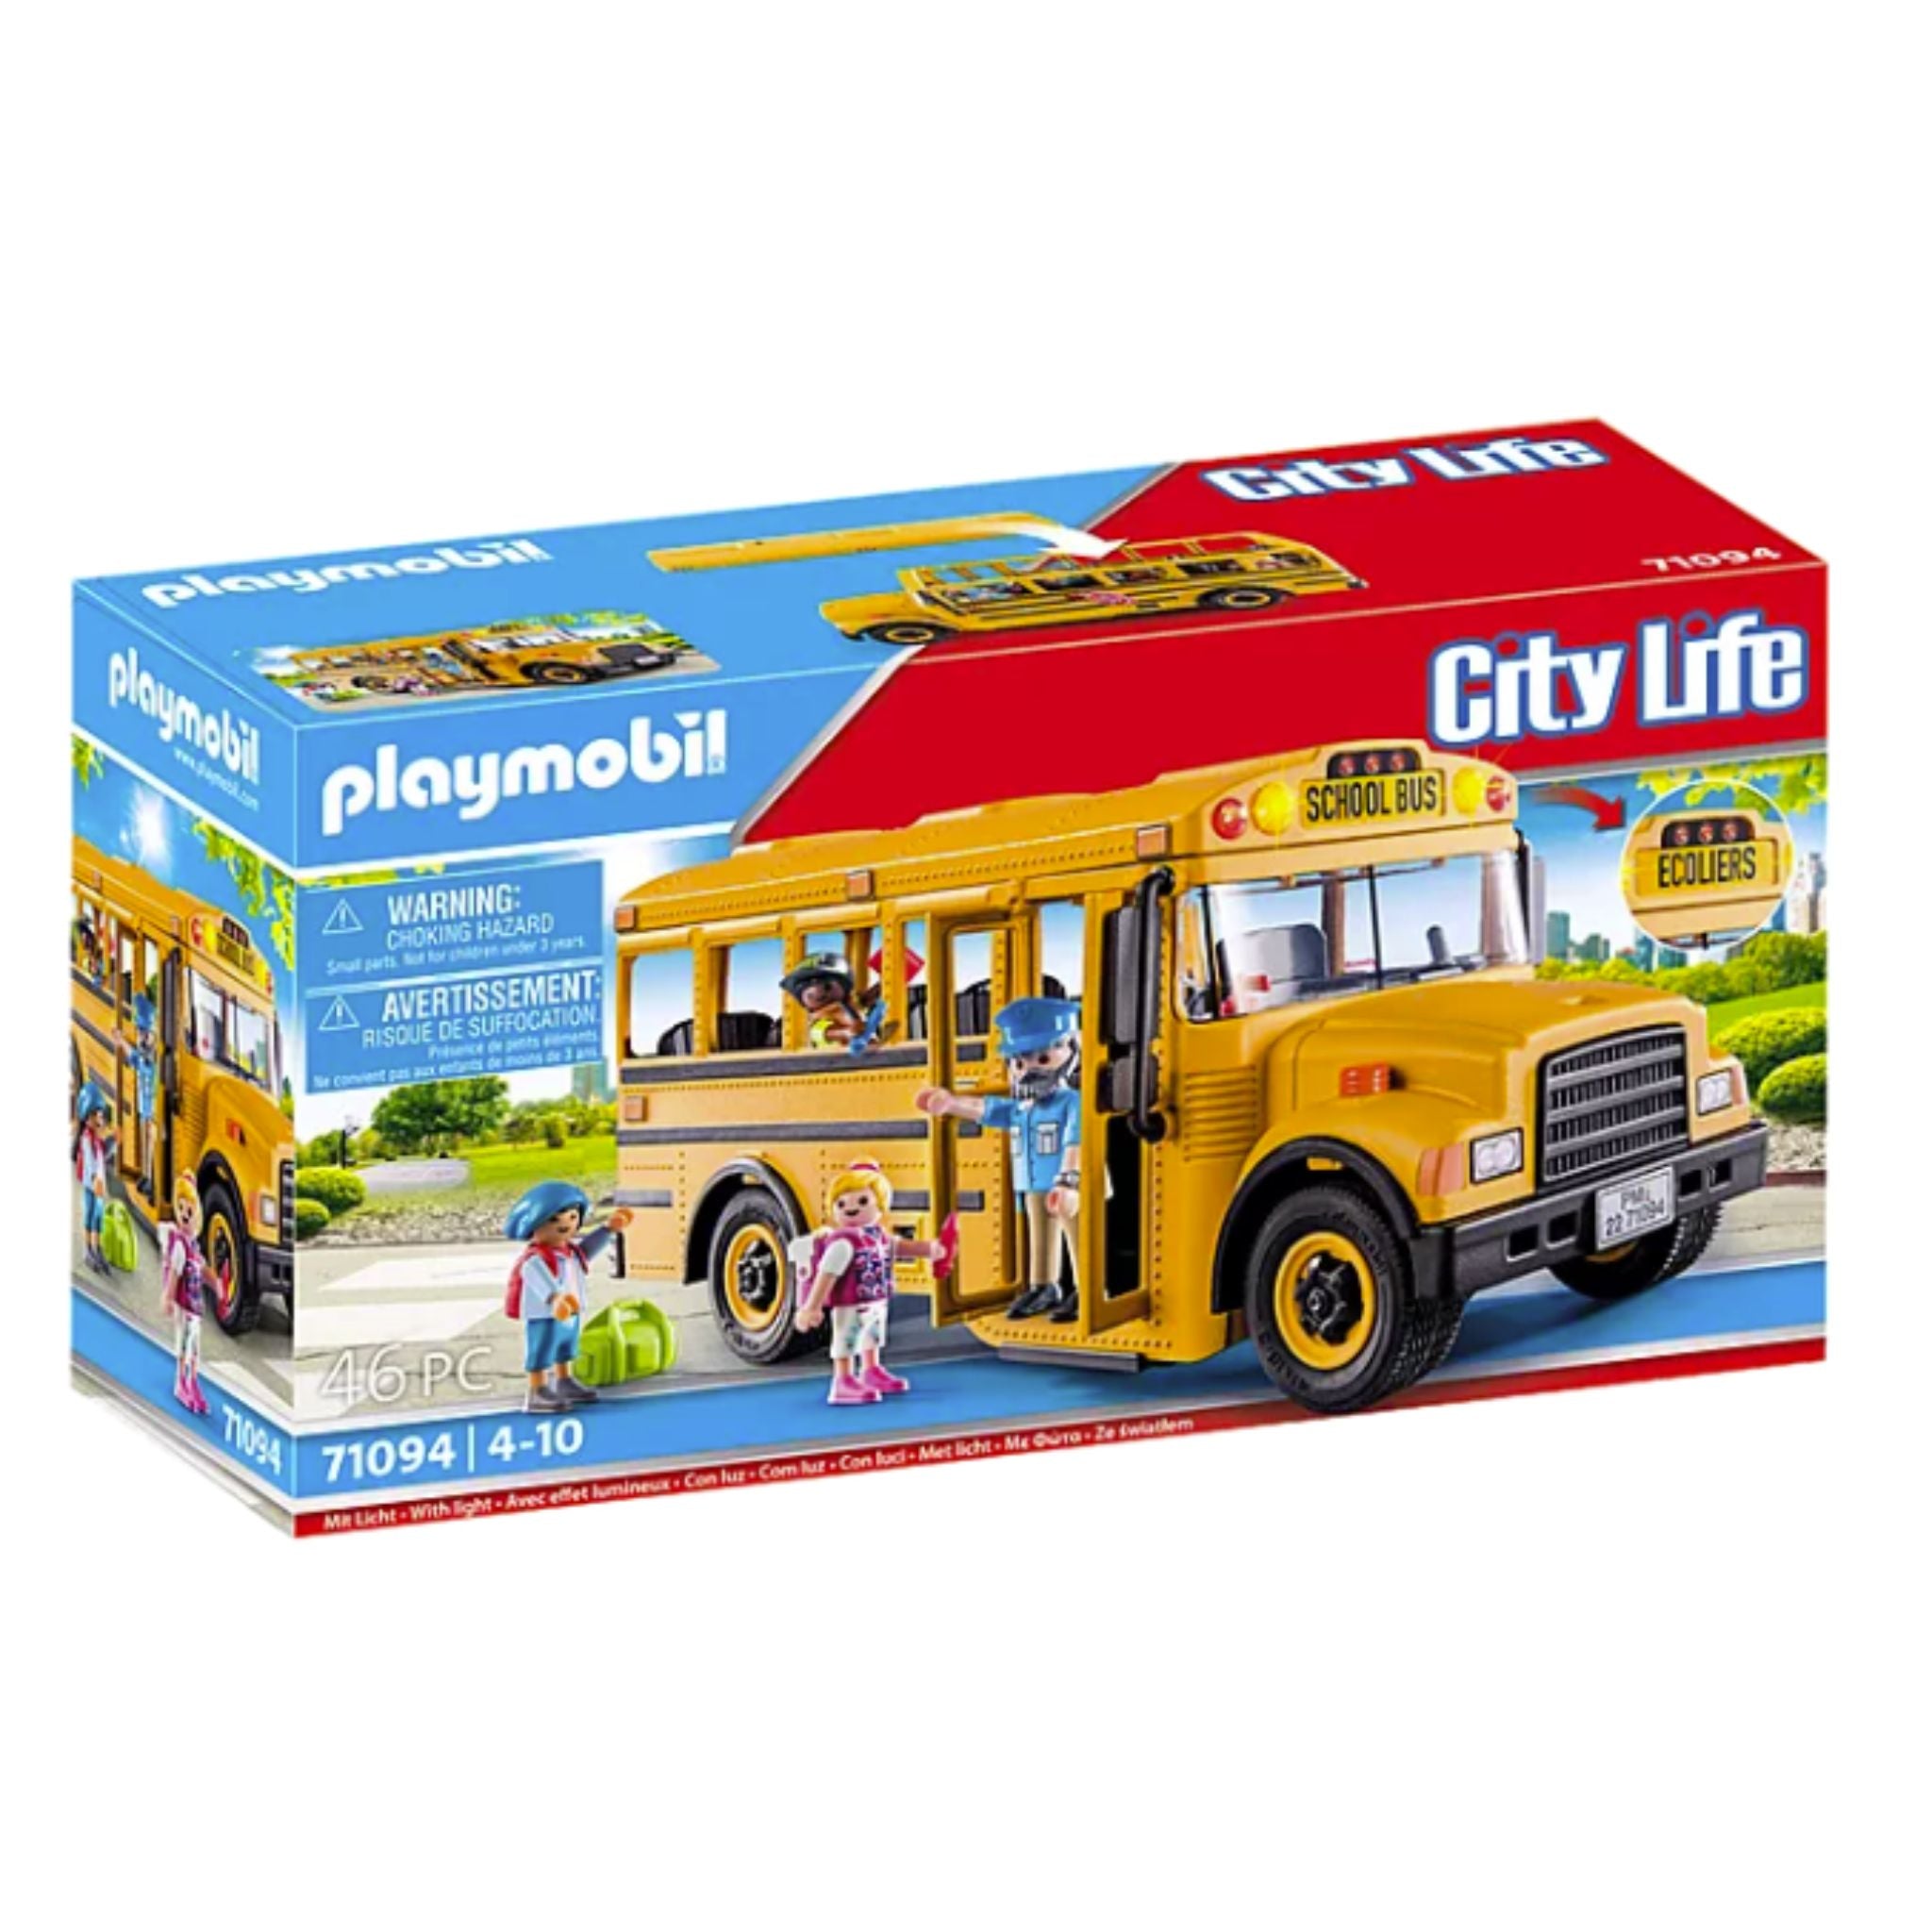  Playmobil - Bicycle Excursion : Toys & Games